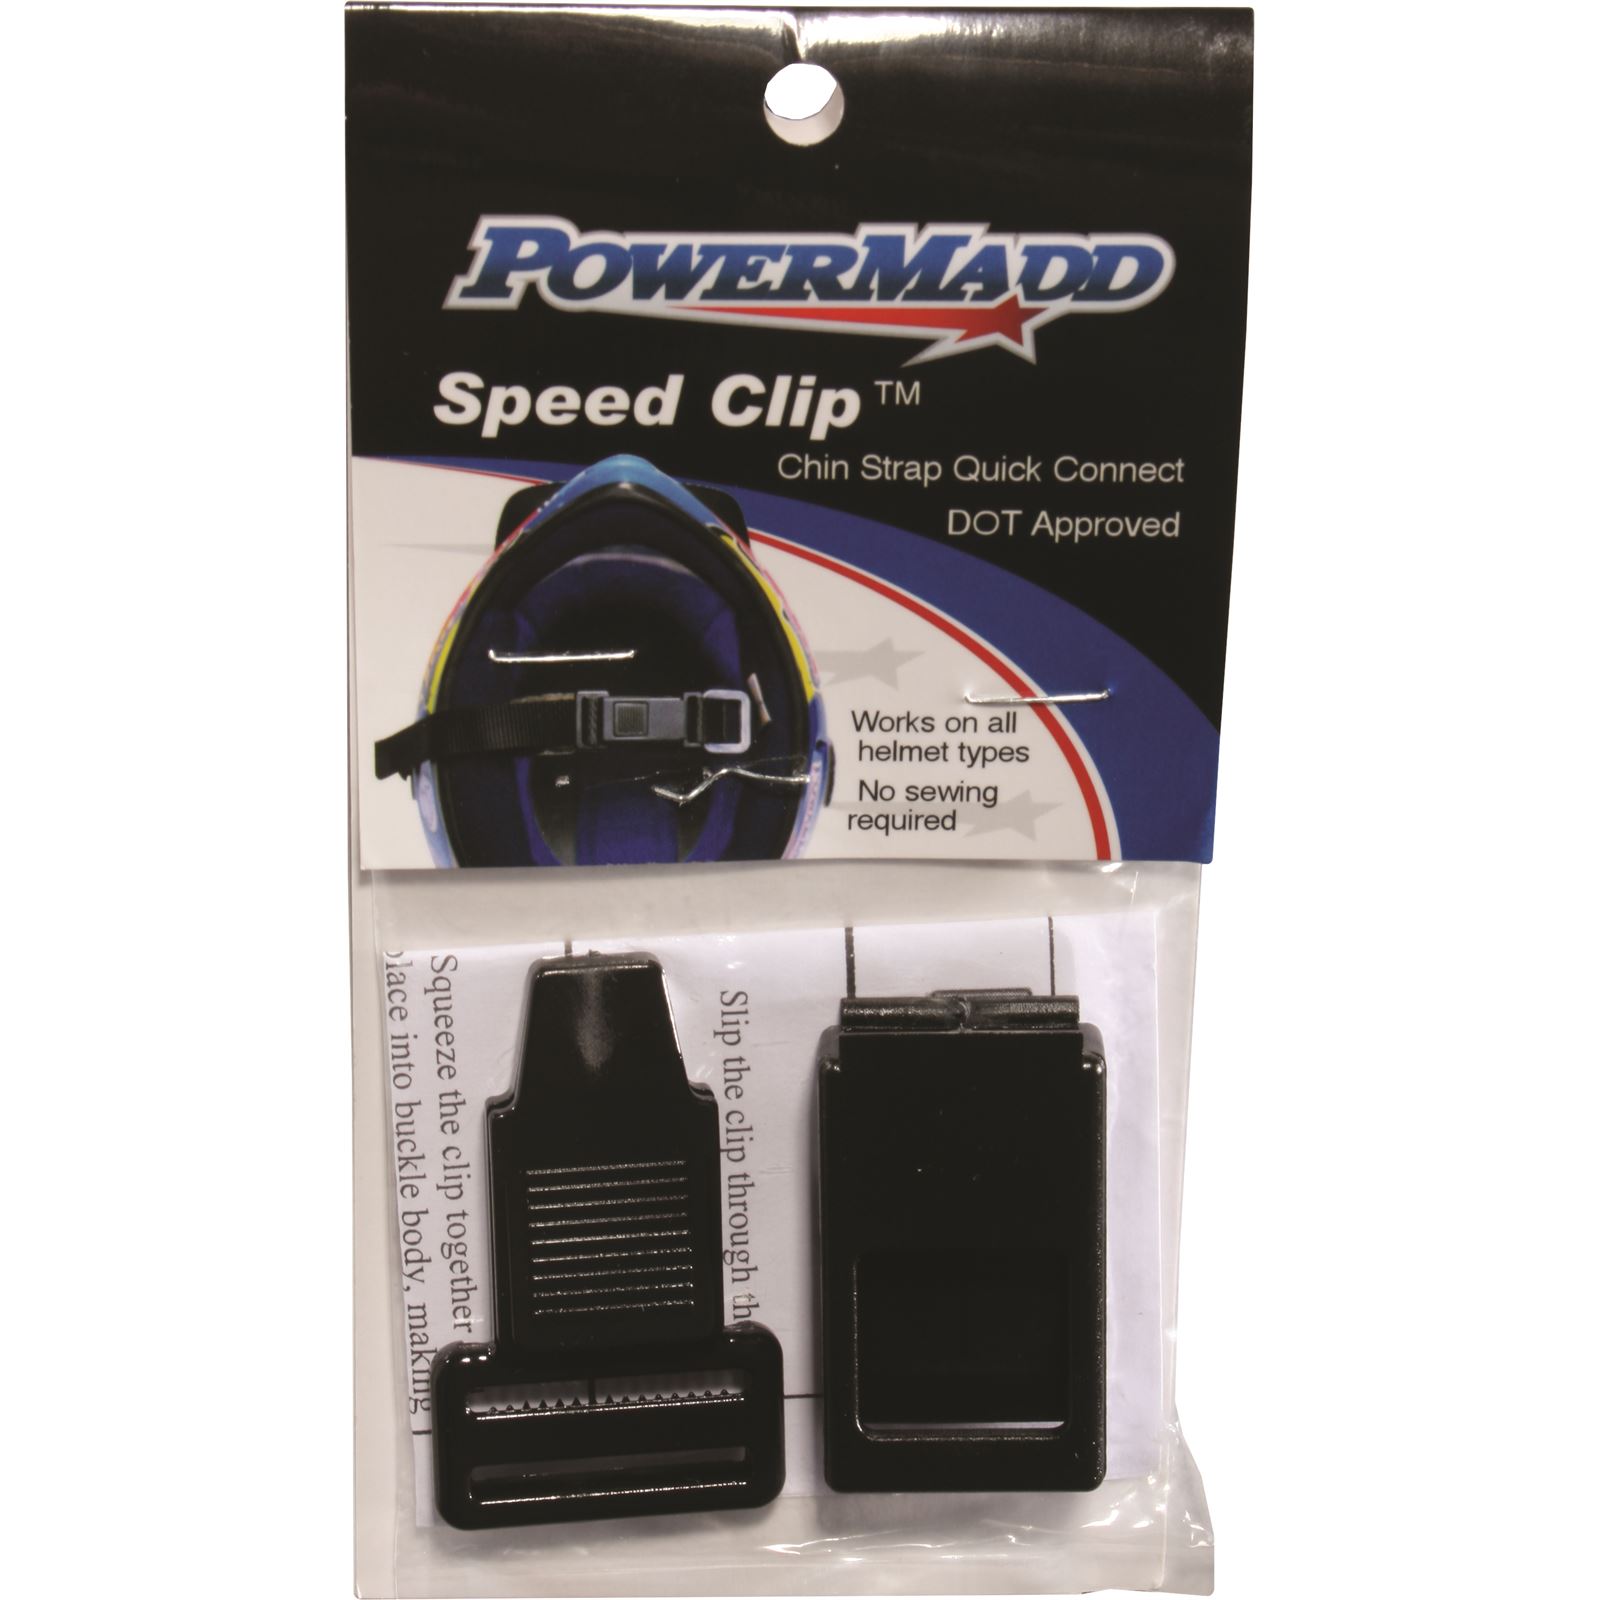 NEW PowerMadd Speed Clip Helmet Chin Strap Quick Connect FREE SHIP 